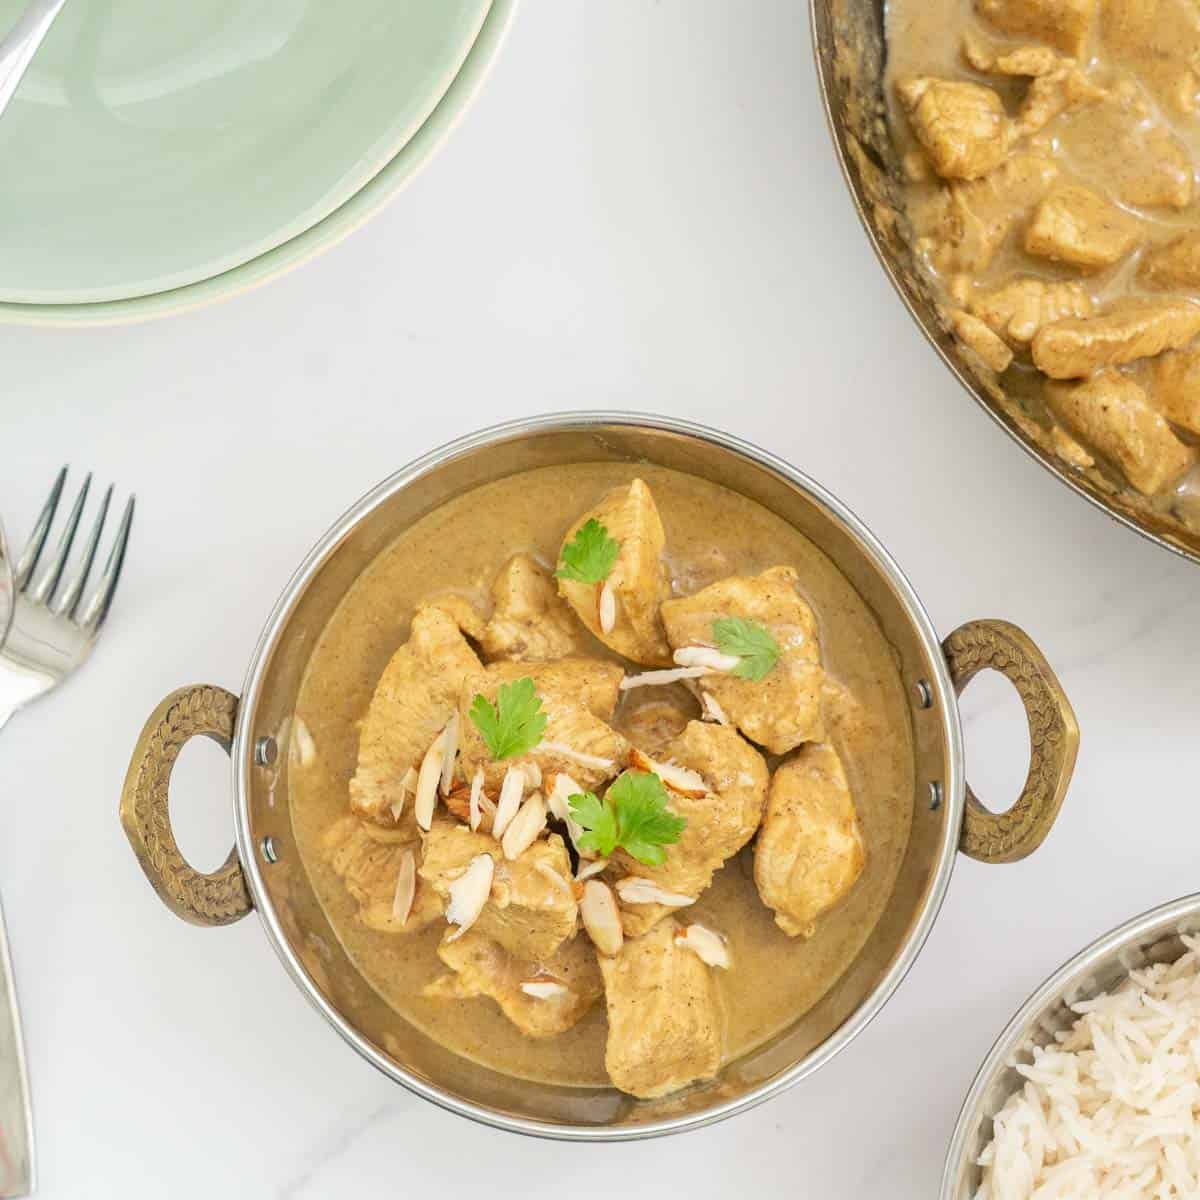 A copper bowl of chicken korma garnished with coriander leaves